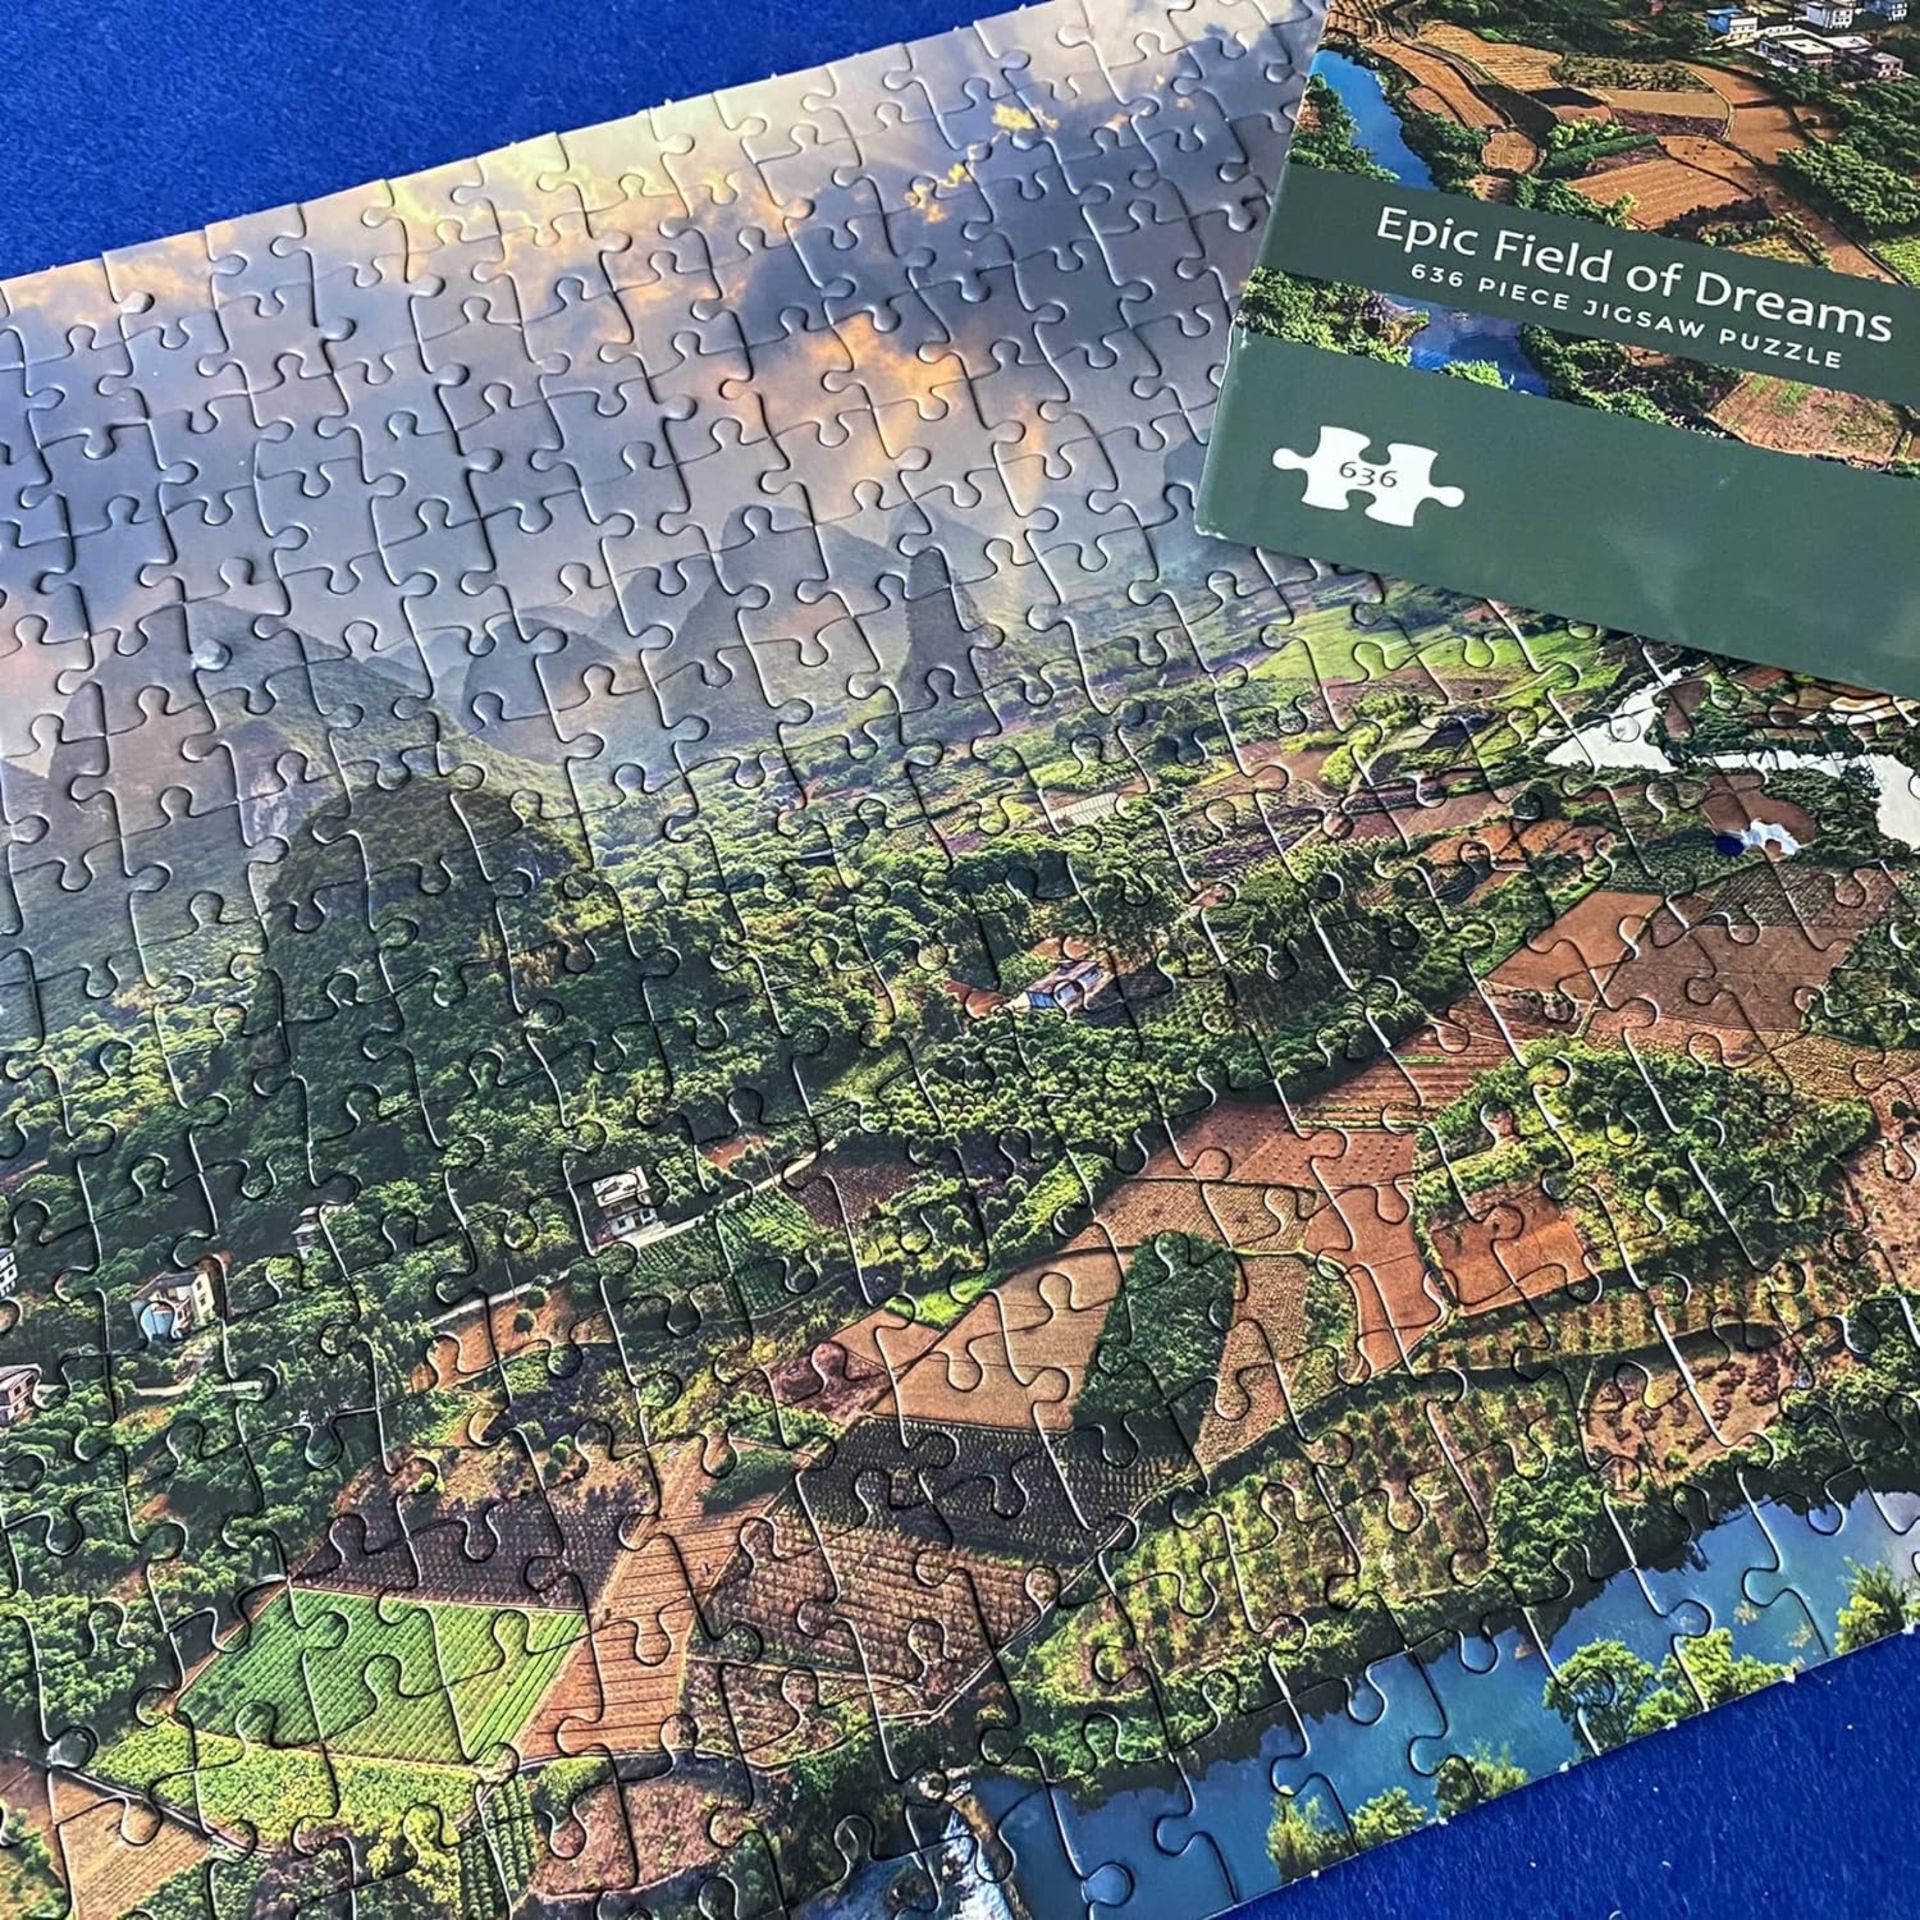 100 X NEW EPIC FIELD OF DREAMS PUZZLE (636 PR) - Image 7 of 8